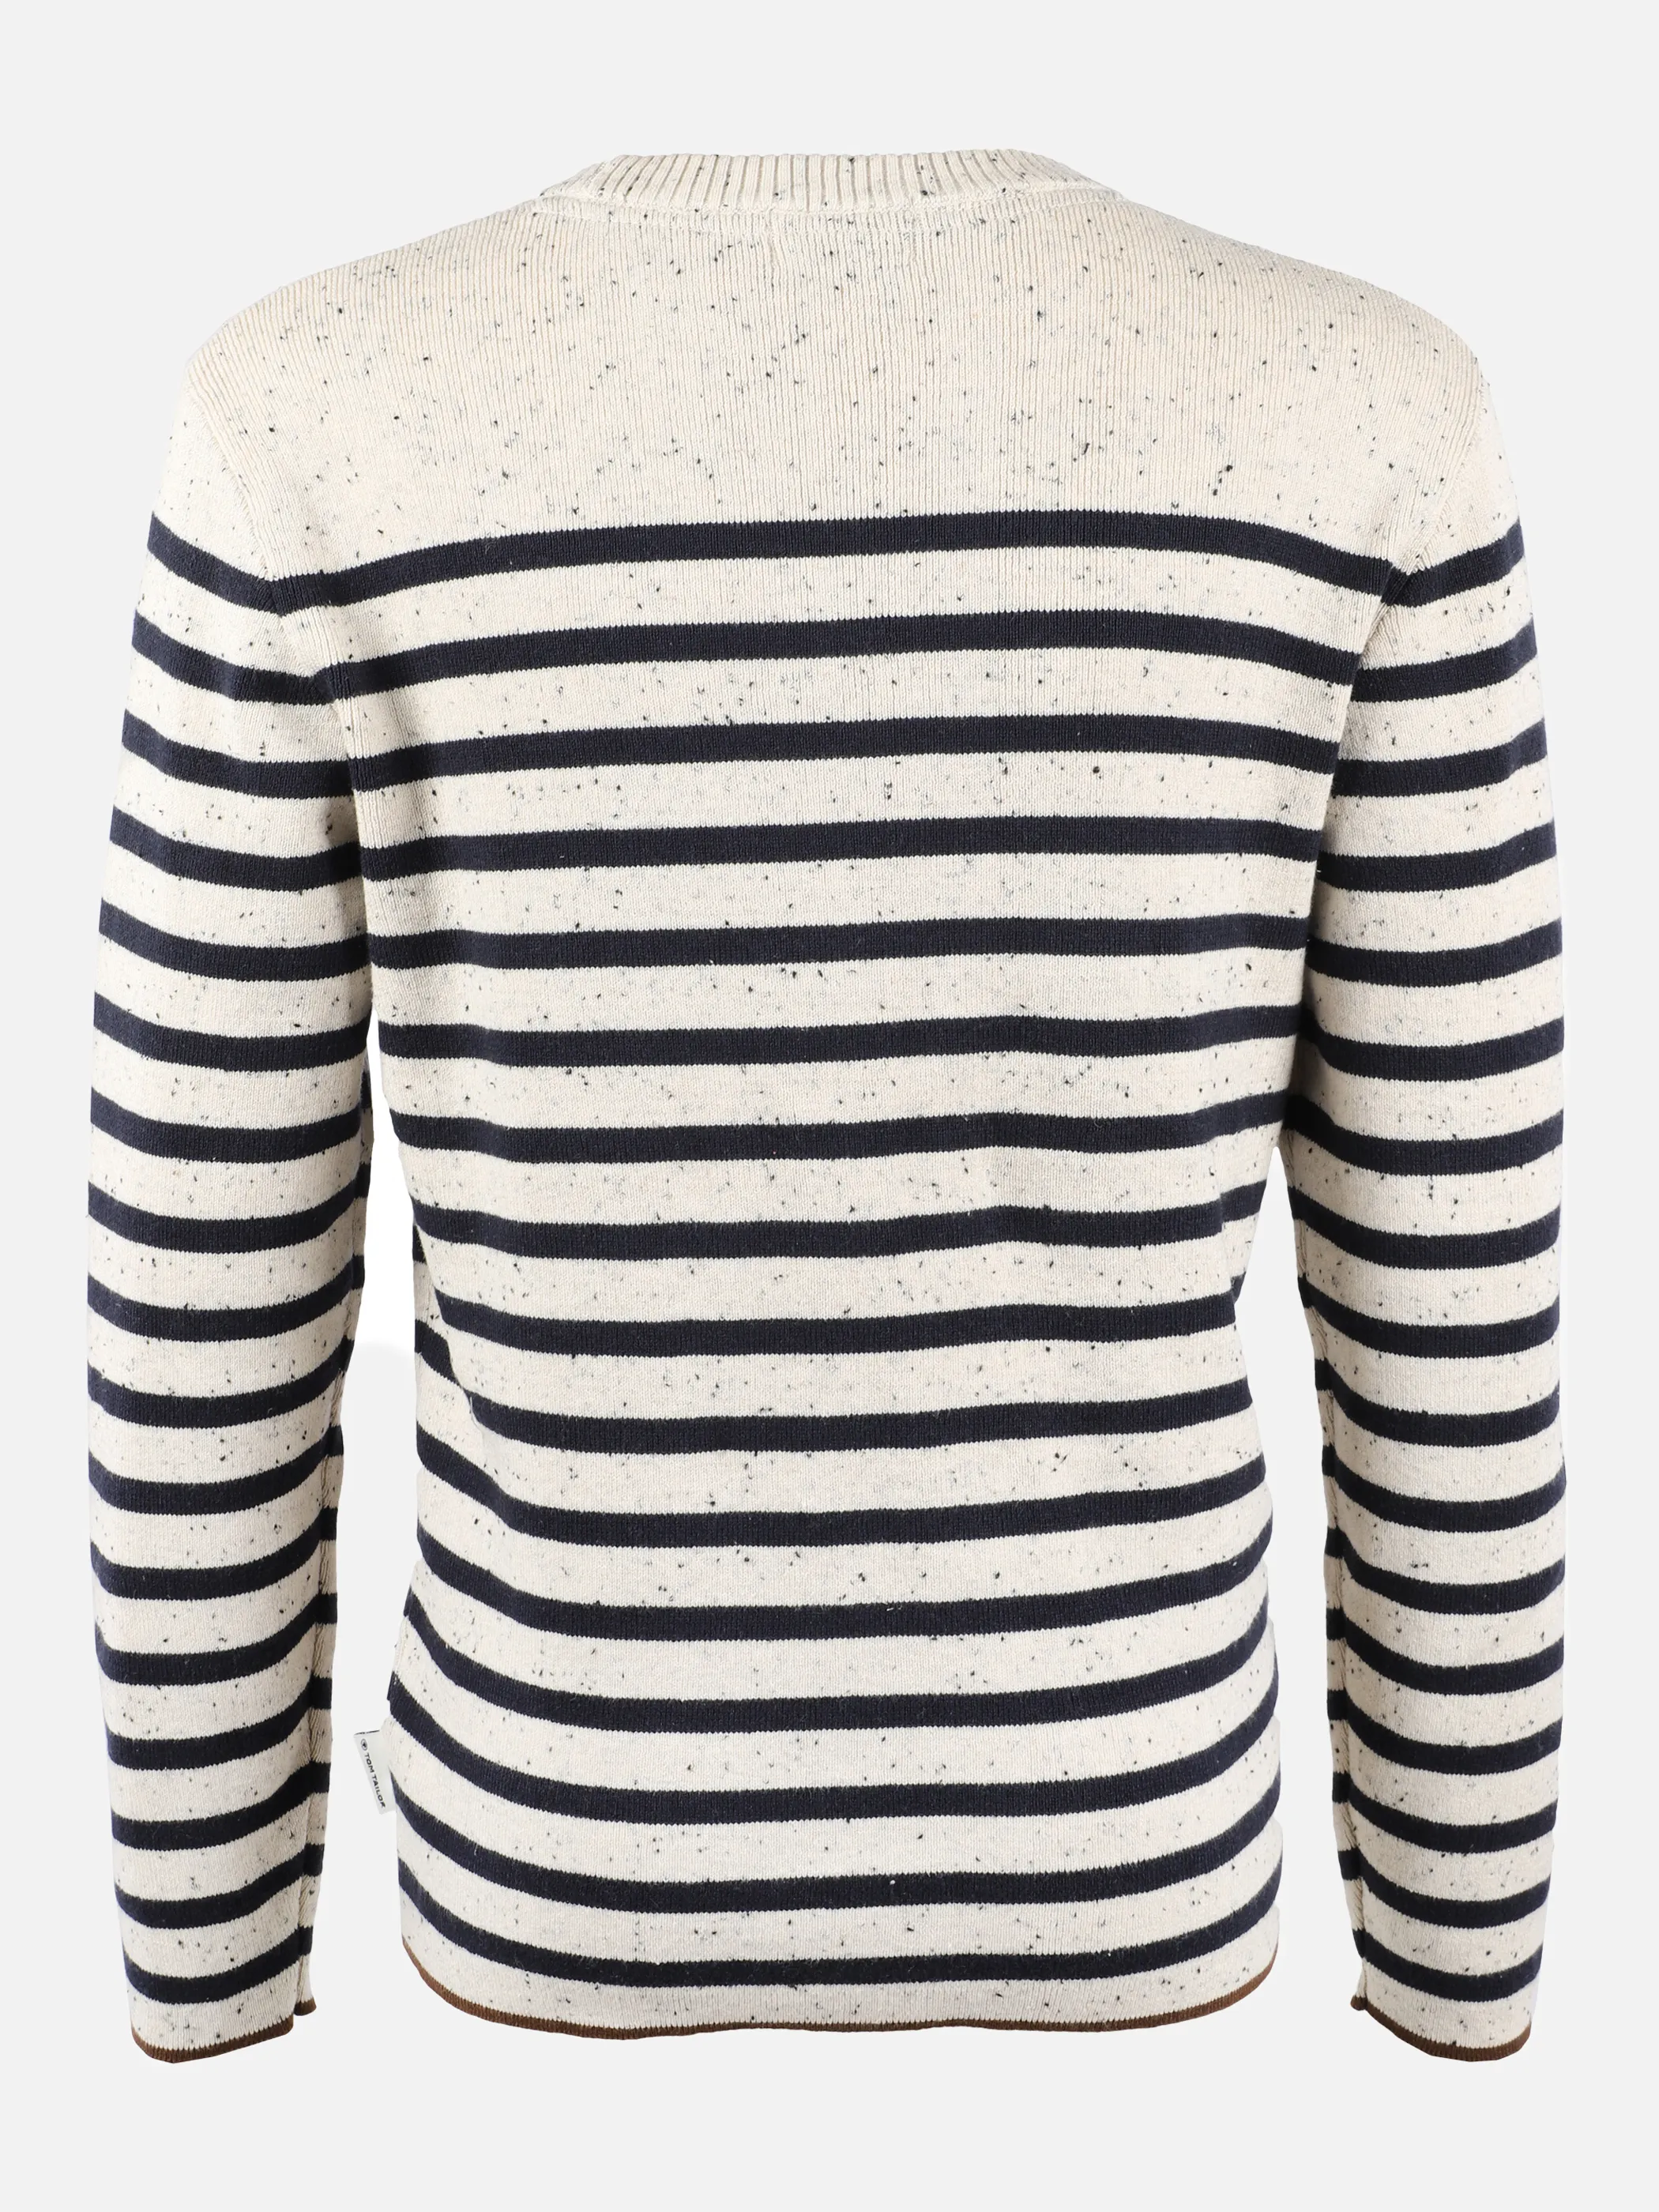 Tom Tailor 1033166 striped knitted pullov Weiß 869646 30448 2